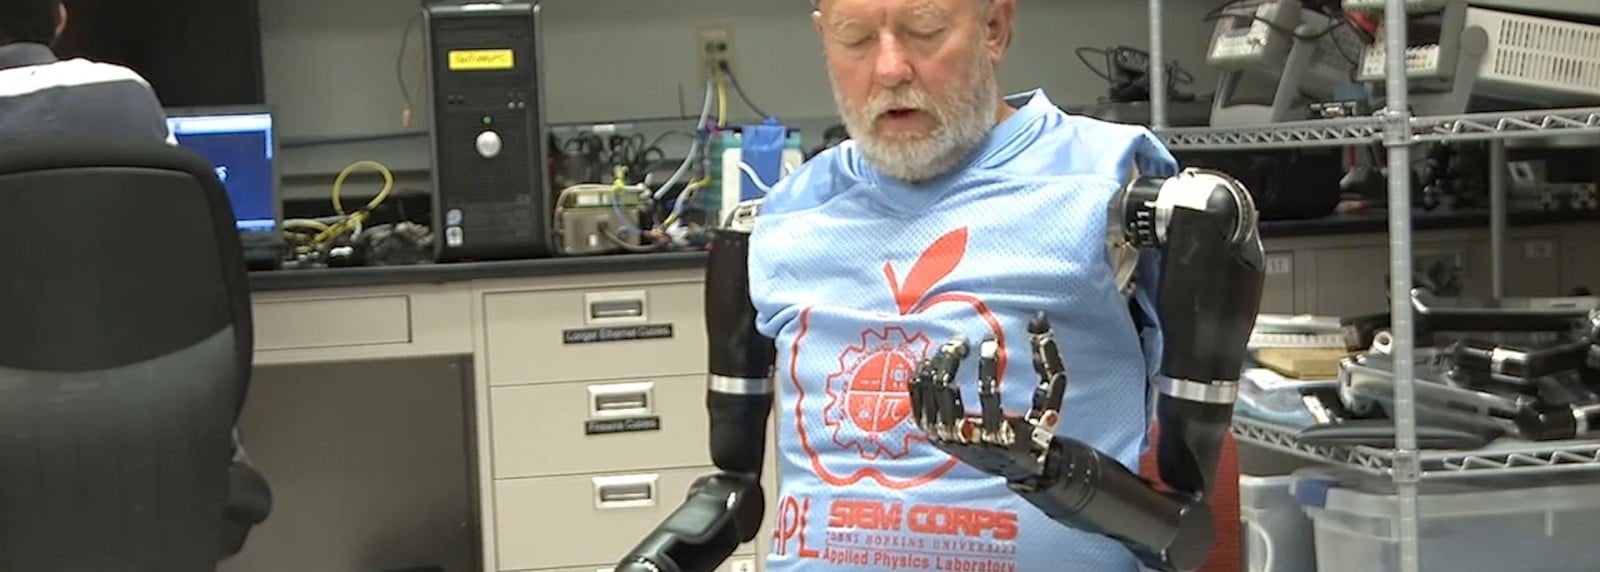 Double Amputee Controls Two Prosthetic Arms Just His Mind E1419196265368 مجلة نقطة العلمية